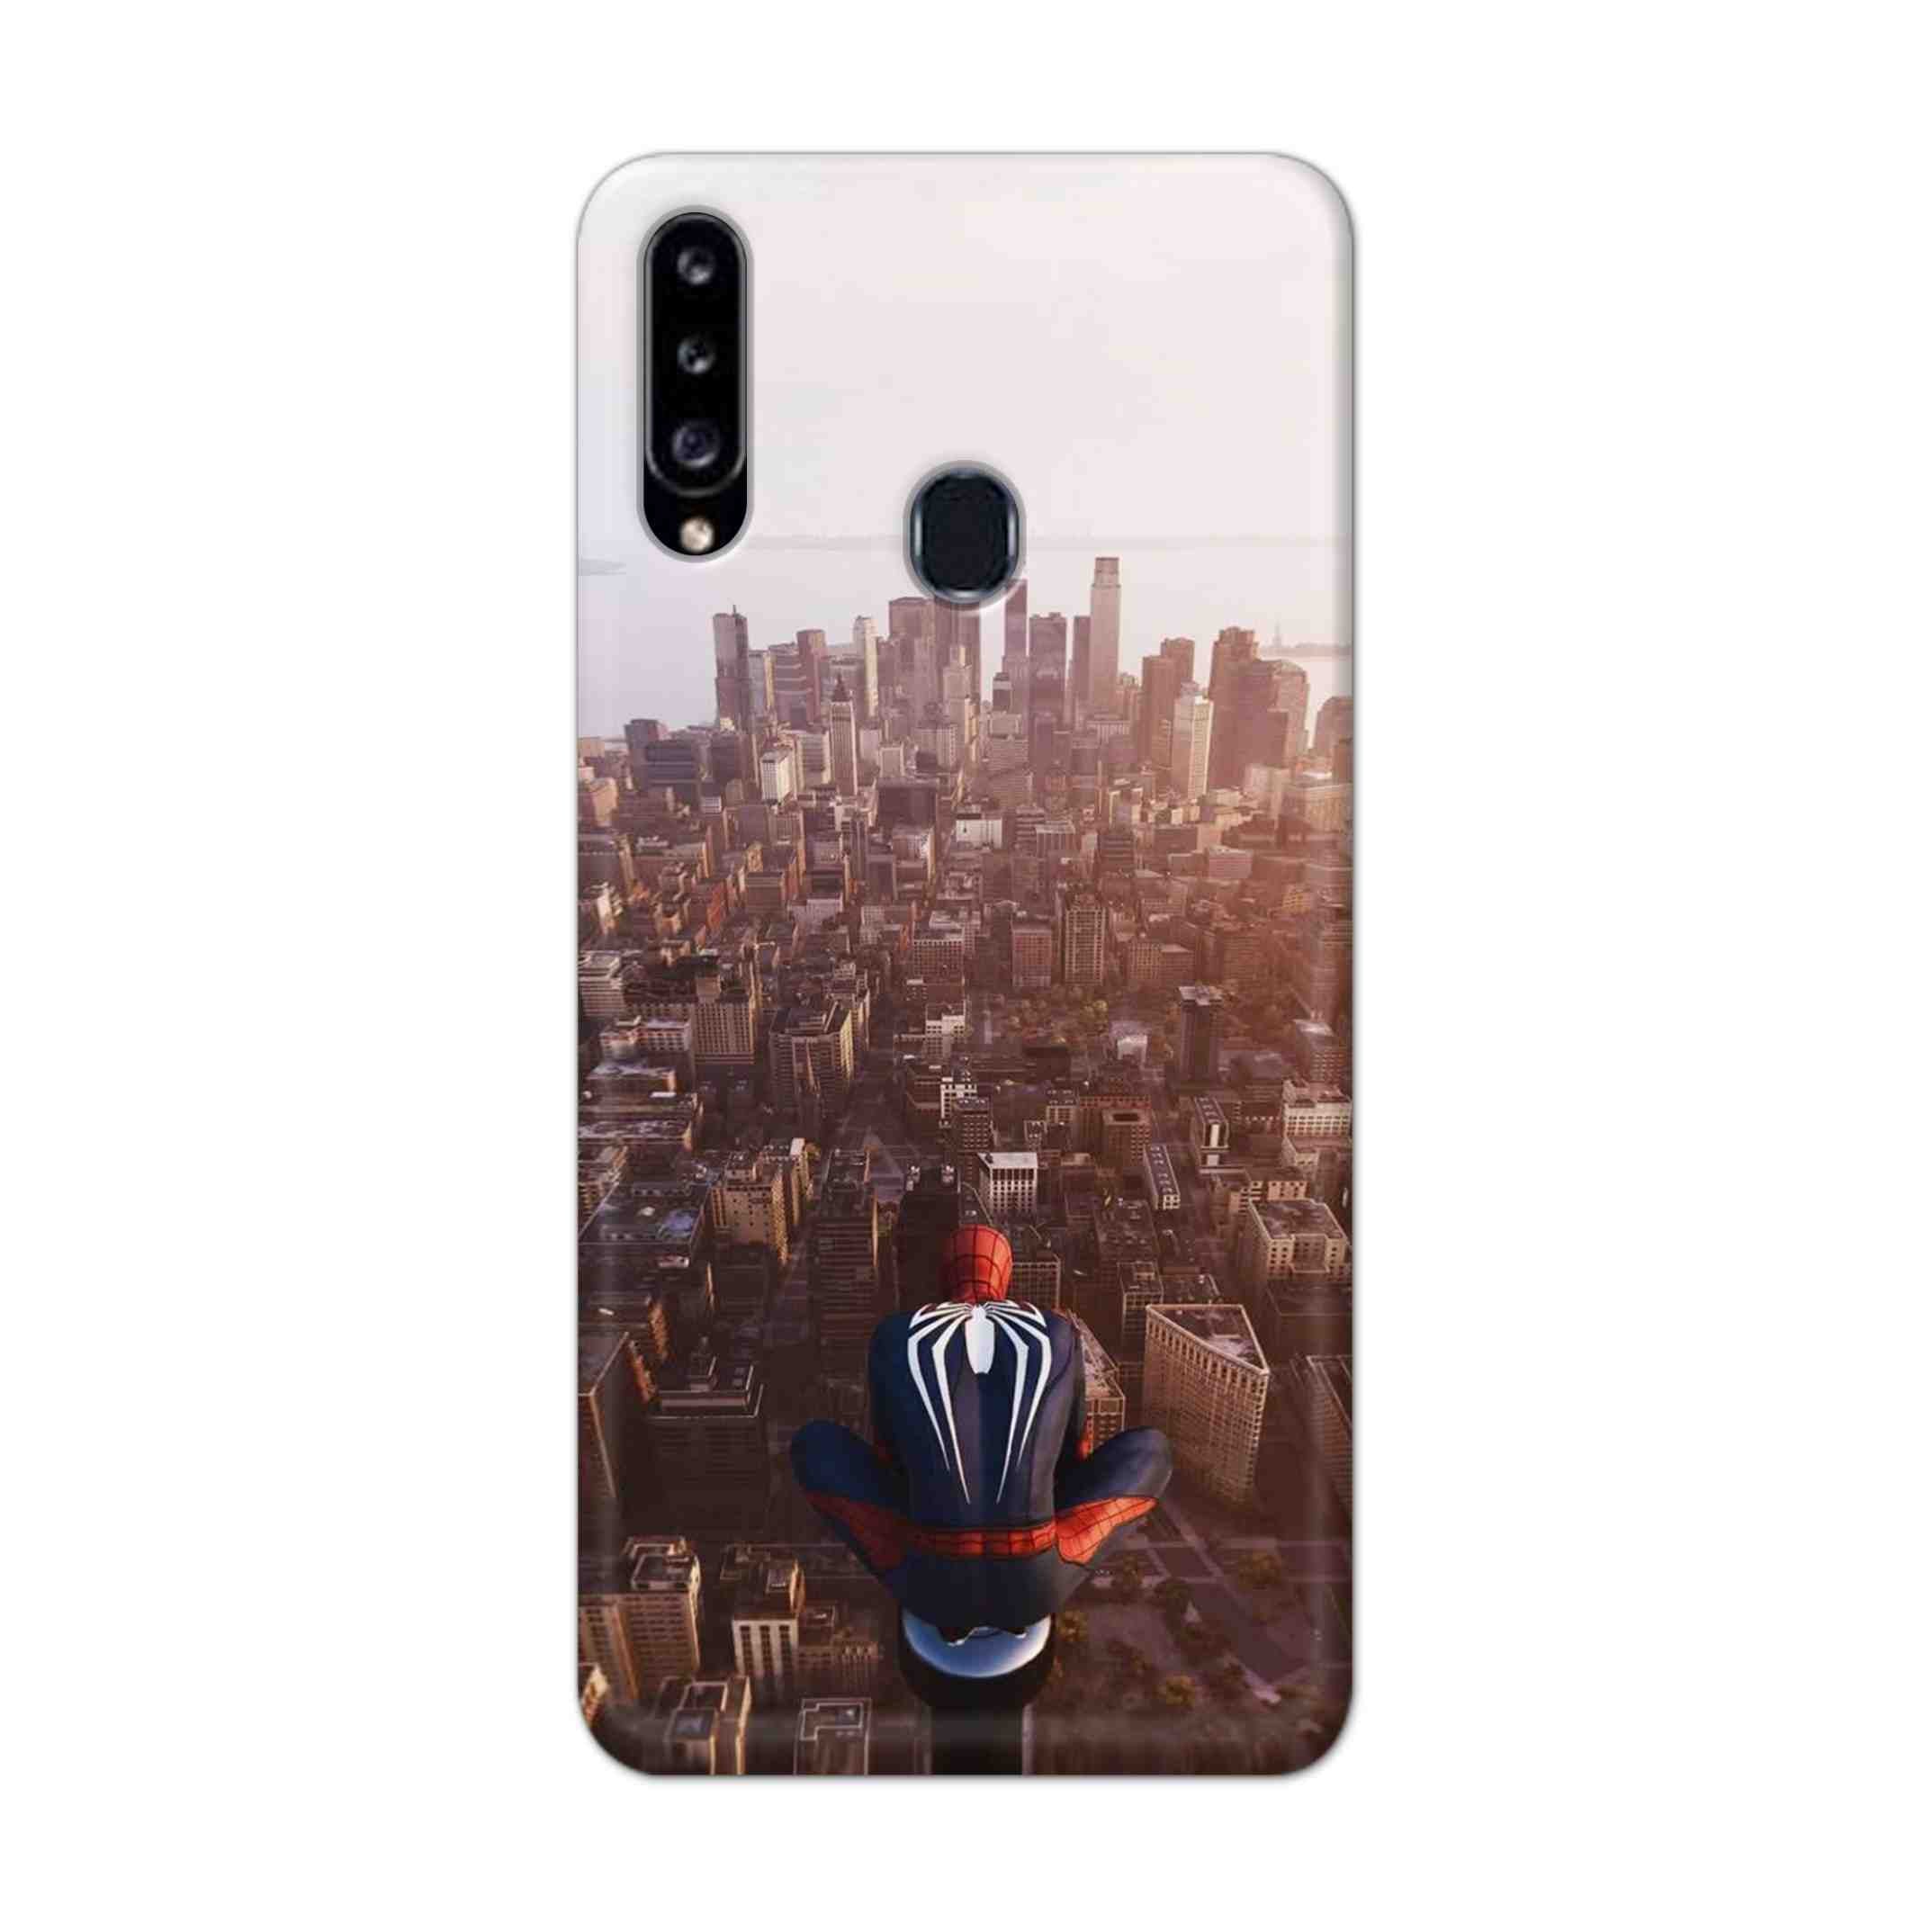 Buy City Of Spiderman Hard Back Mobile Phone Case Cover For Samsung Galaxy A21 Online